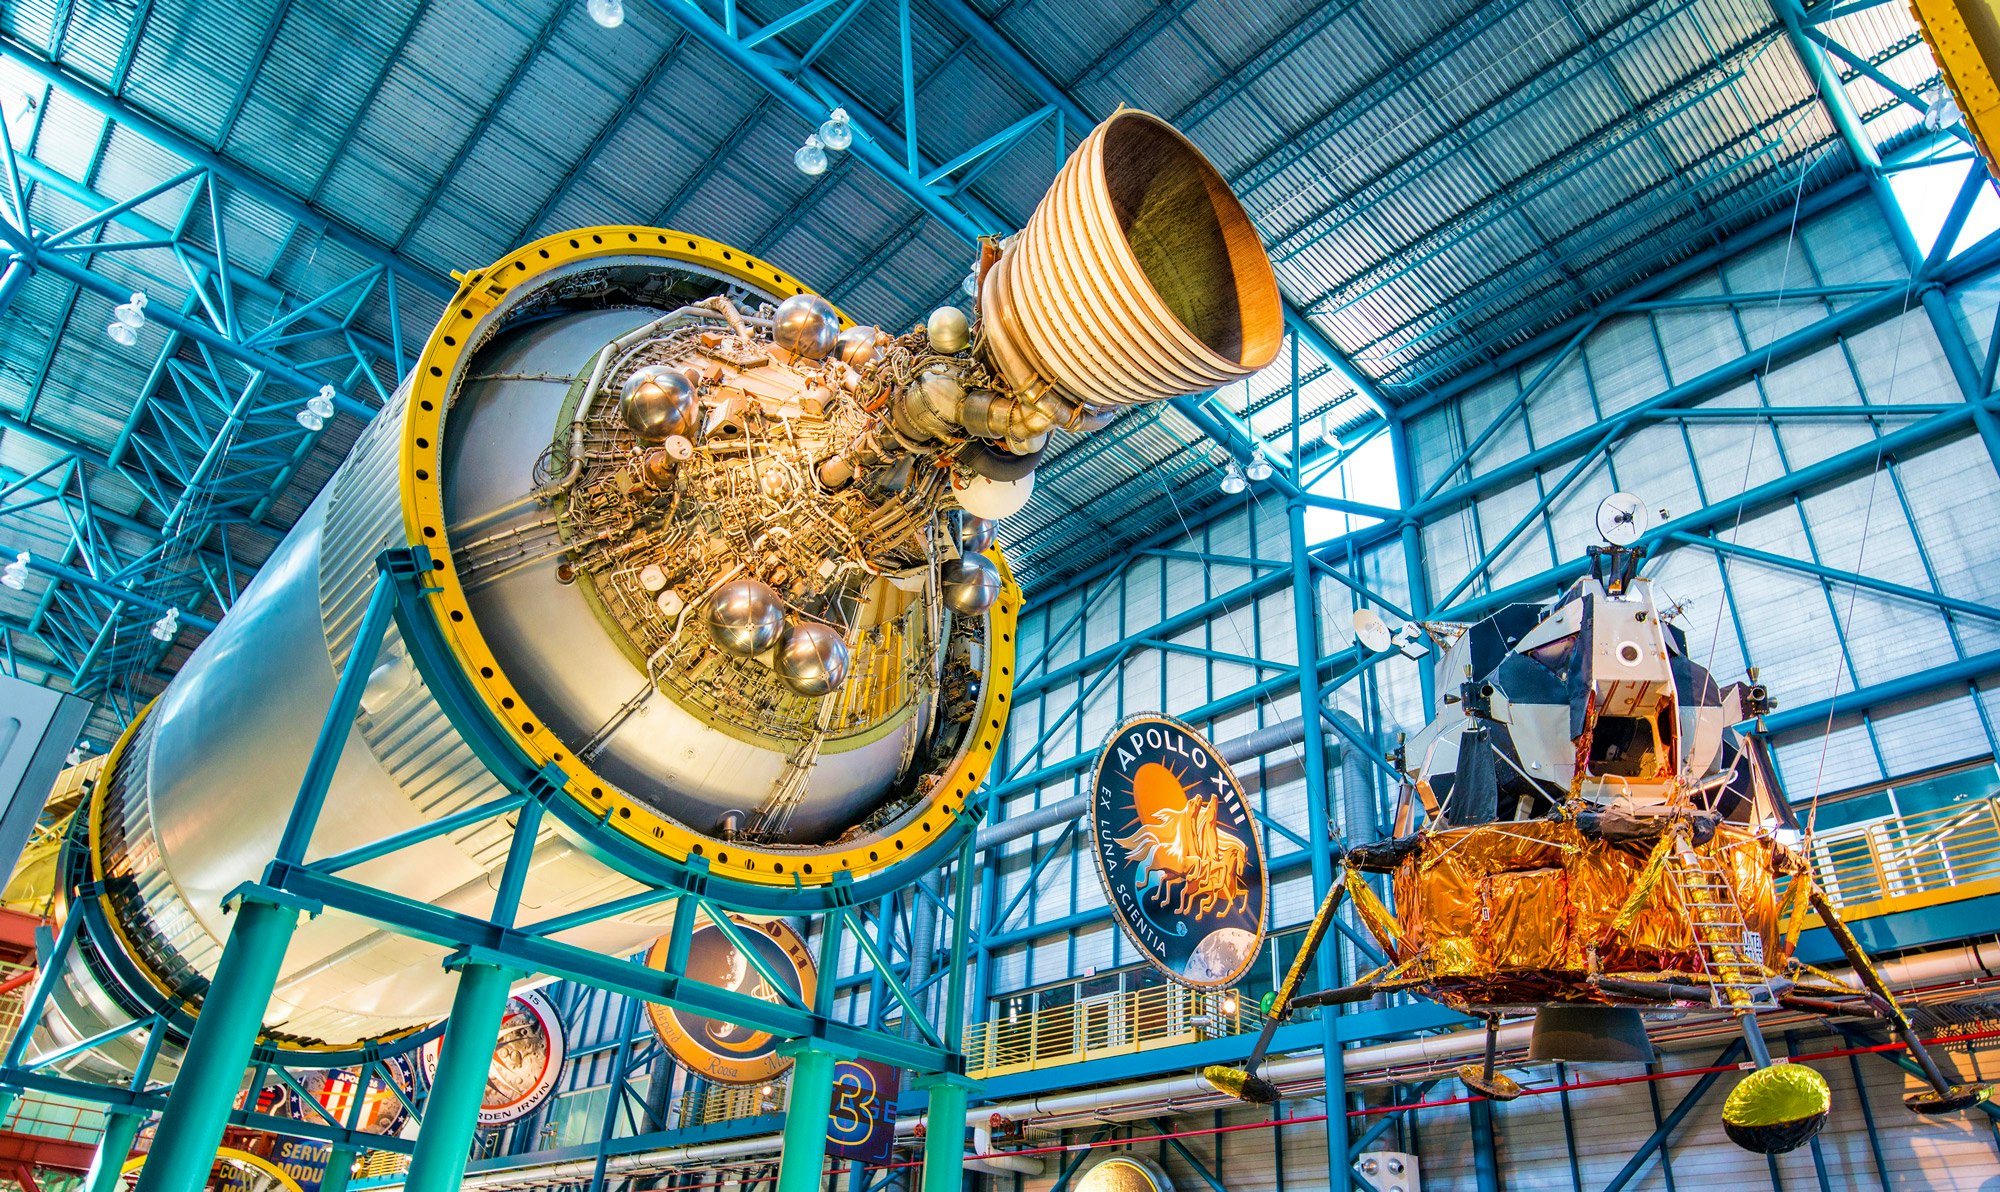 First stage engines from the Saturn 5 rocket on display at the Kennedy Space Center © NaughtyNut / Shutterstock